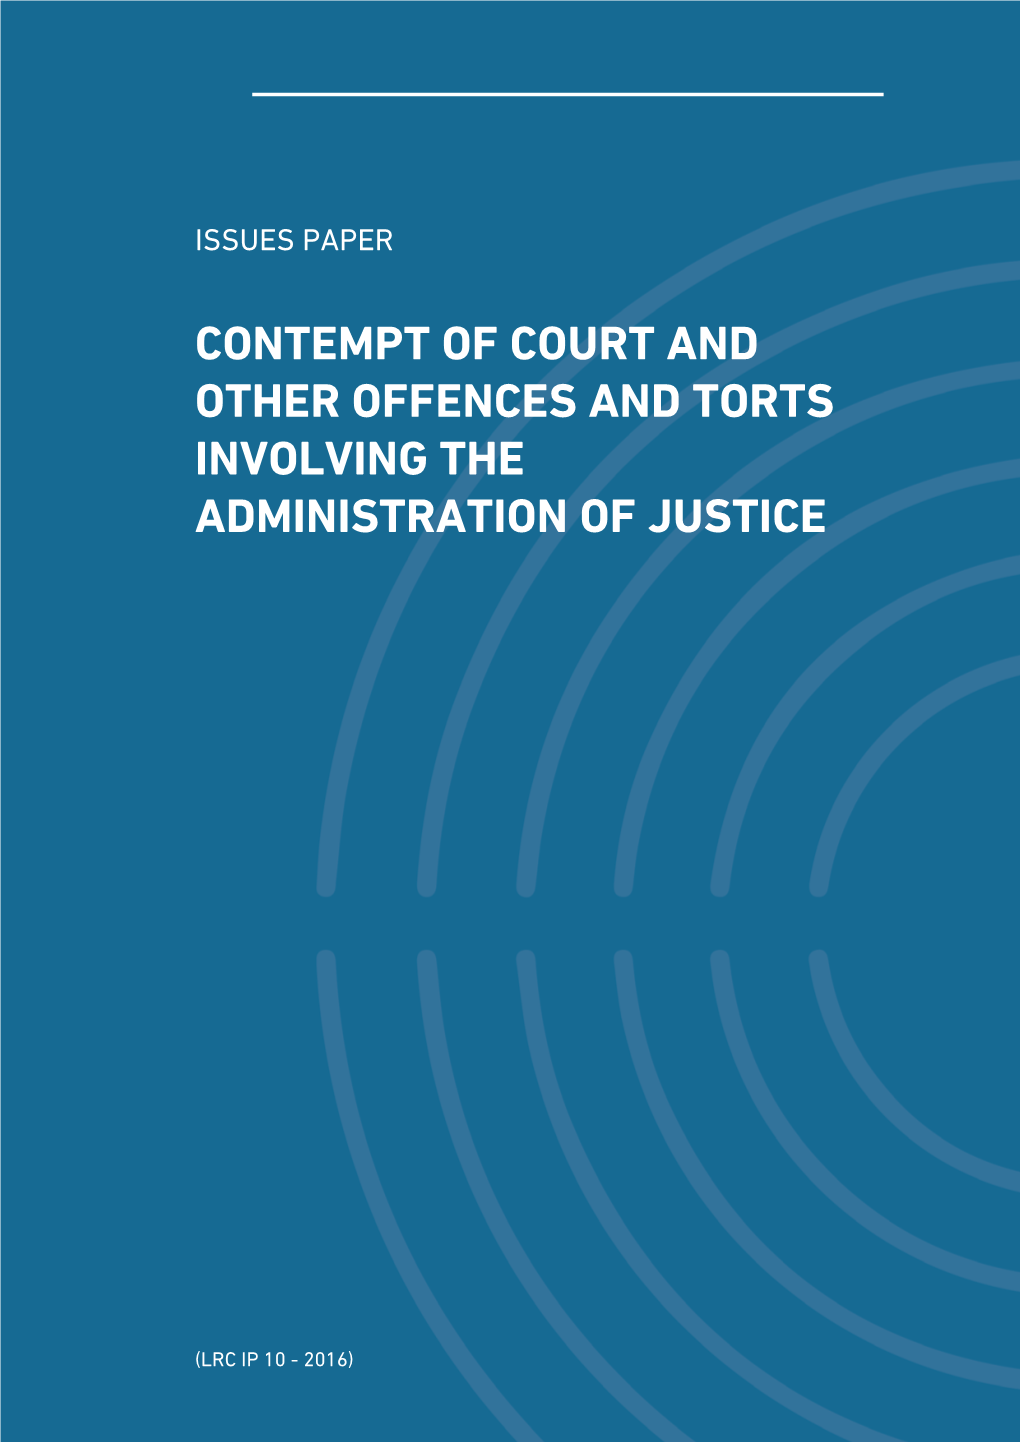 Contempt of Court and Other Offences and Torts Involving the Administration of Justice